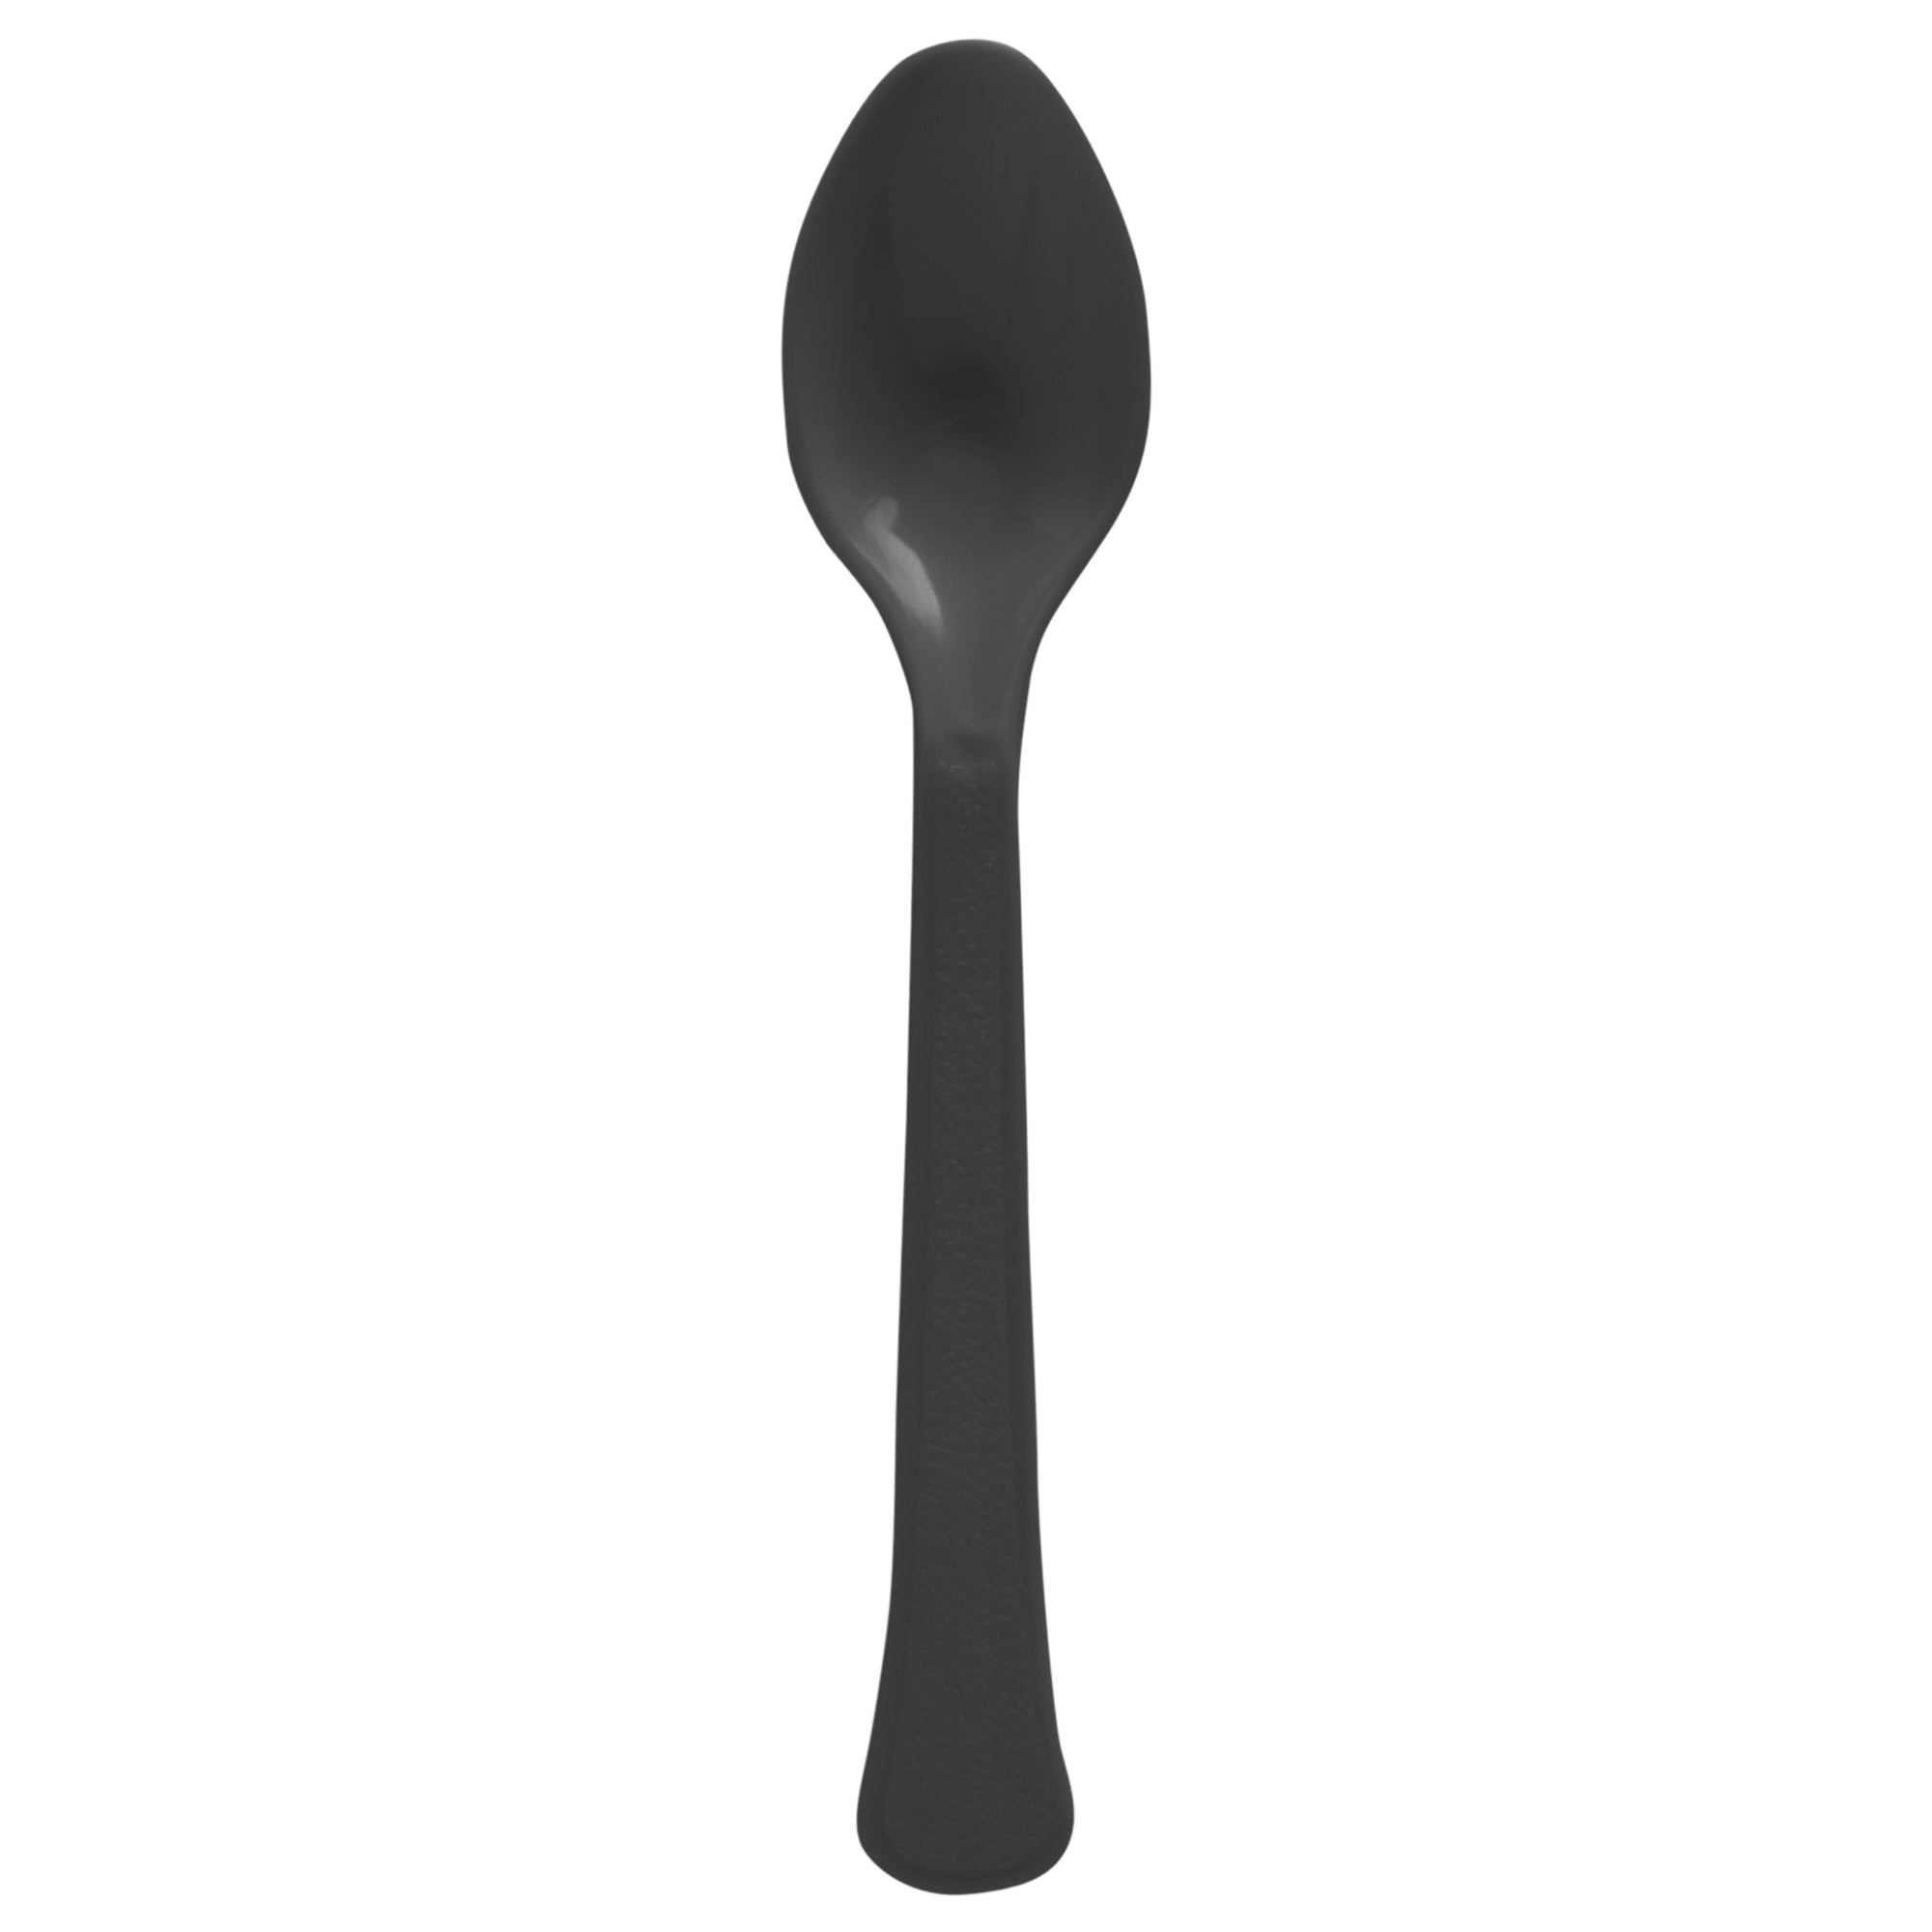 Jet Black 50-Count Heavyweight Spoons